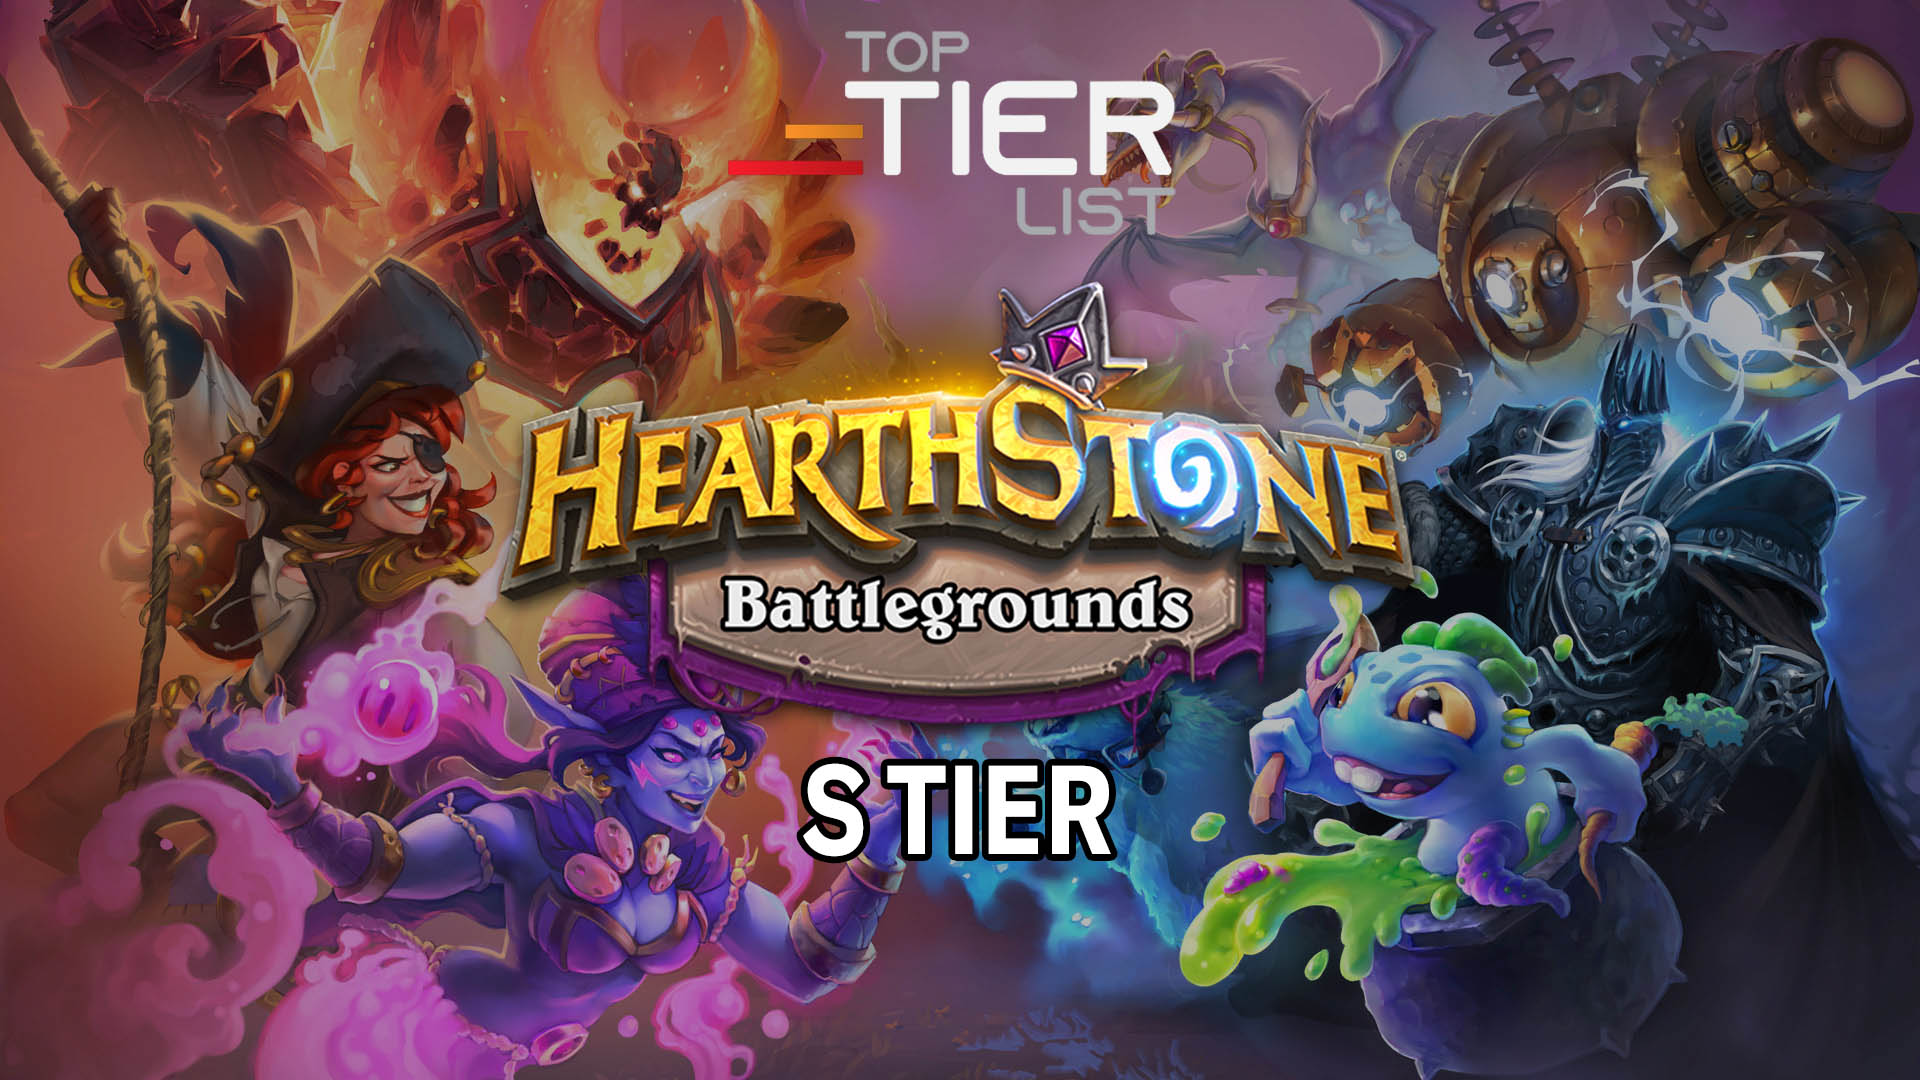 The Greatest Heroes of the Hearthstone Battegrounds Tier List